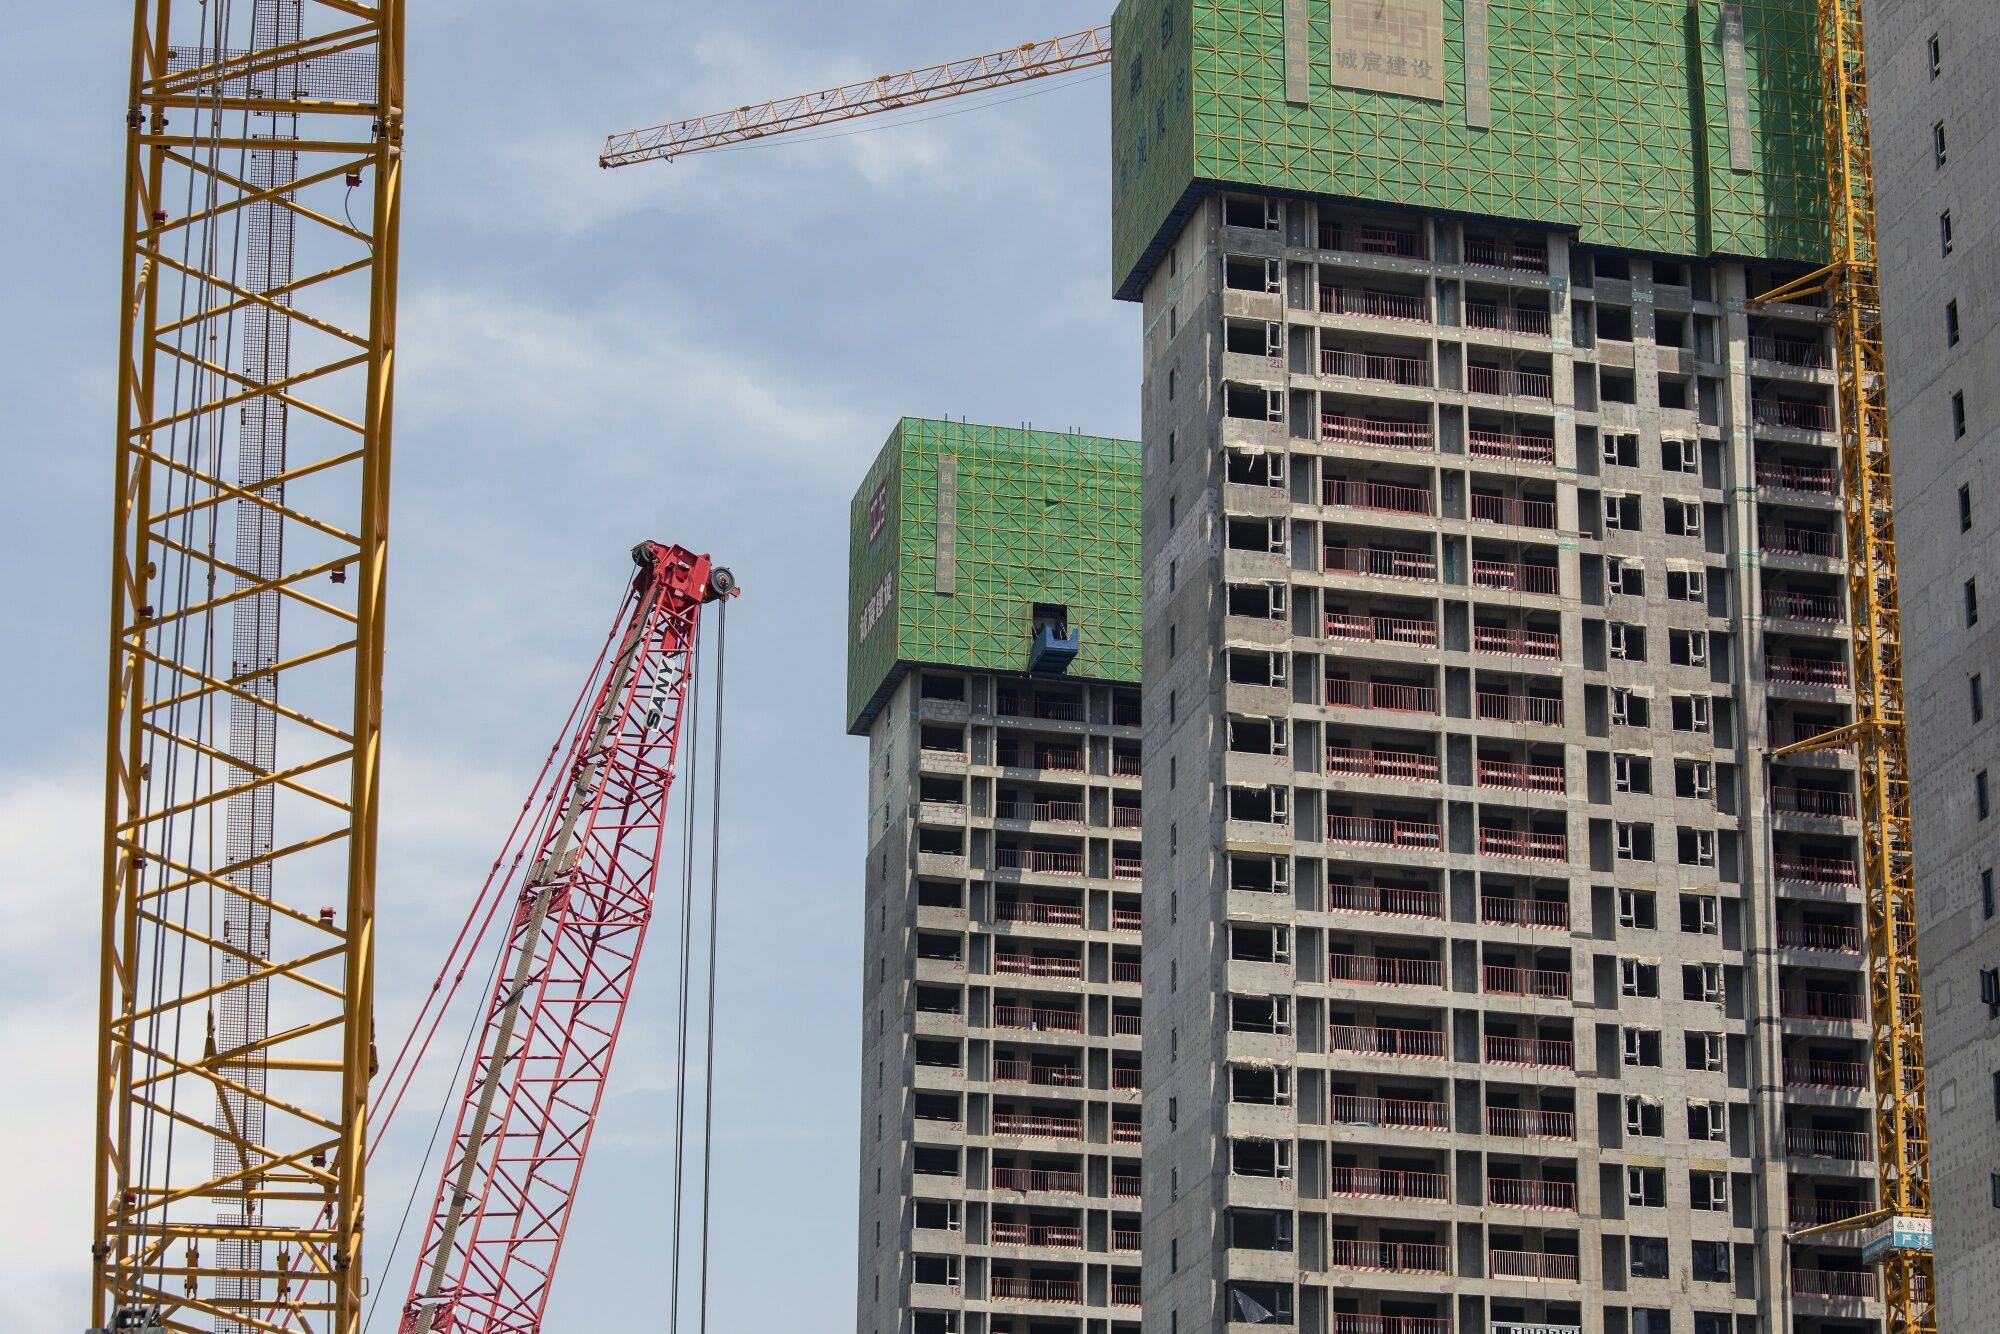 Residential buildings under construction in Zhengzhou, Henan province, China. Photo: Bloomberg